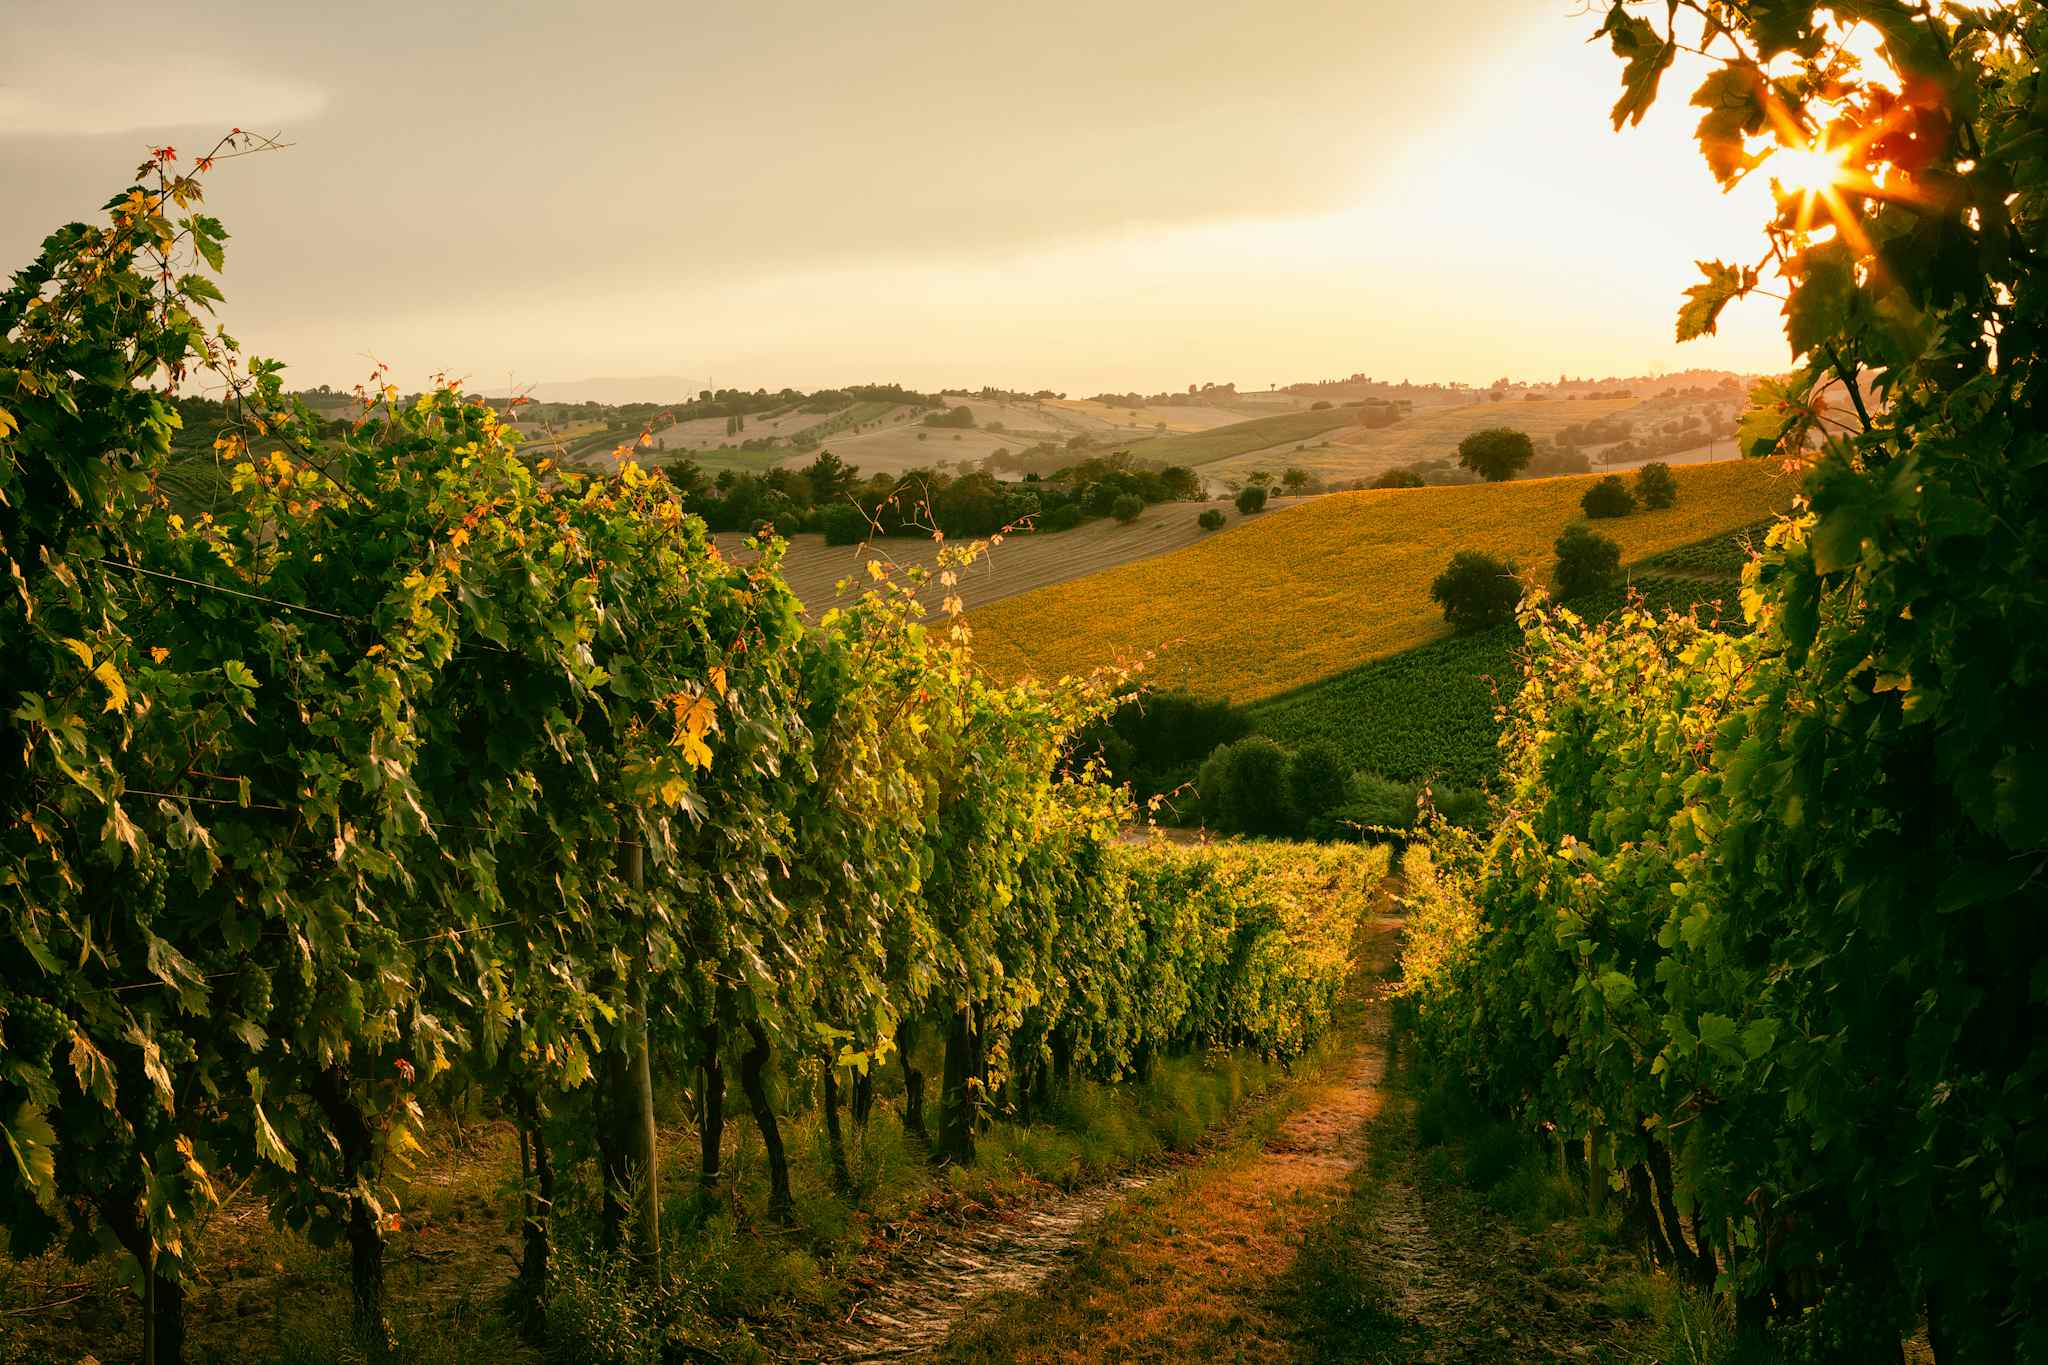 Vineyard, Le Marche, Cycling, Italy, Getty